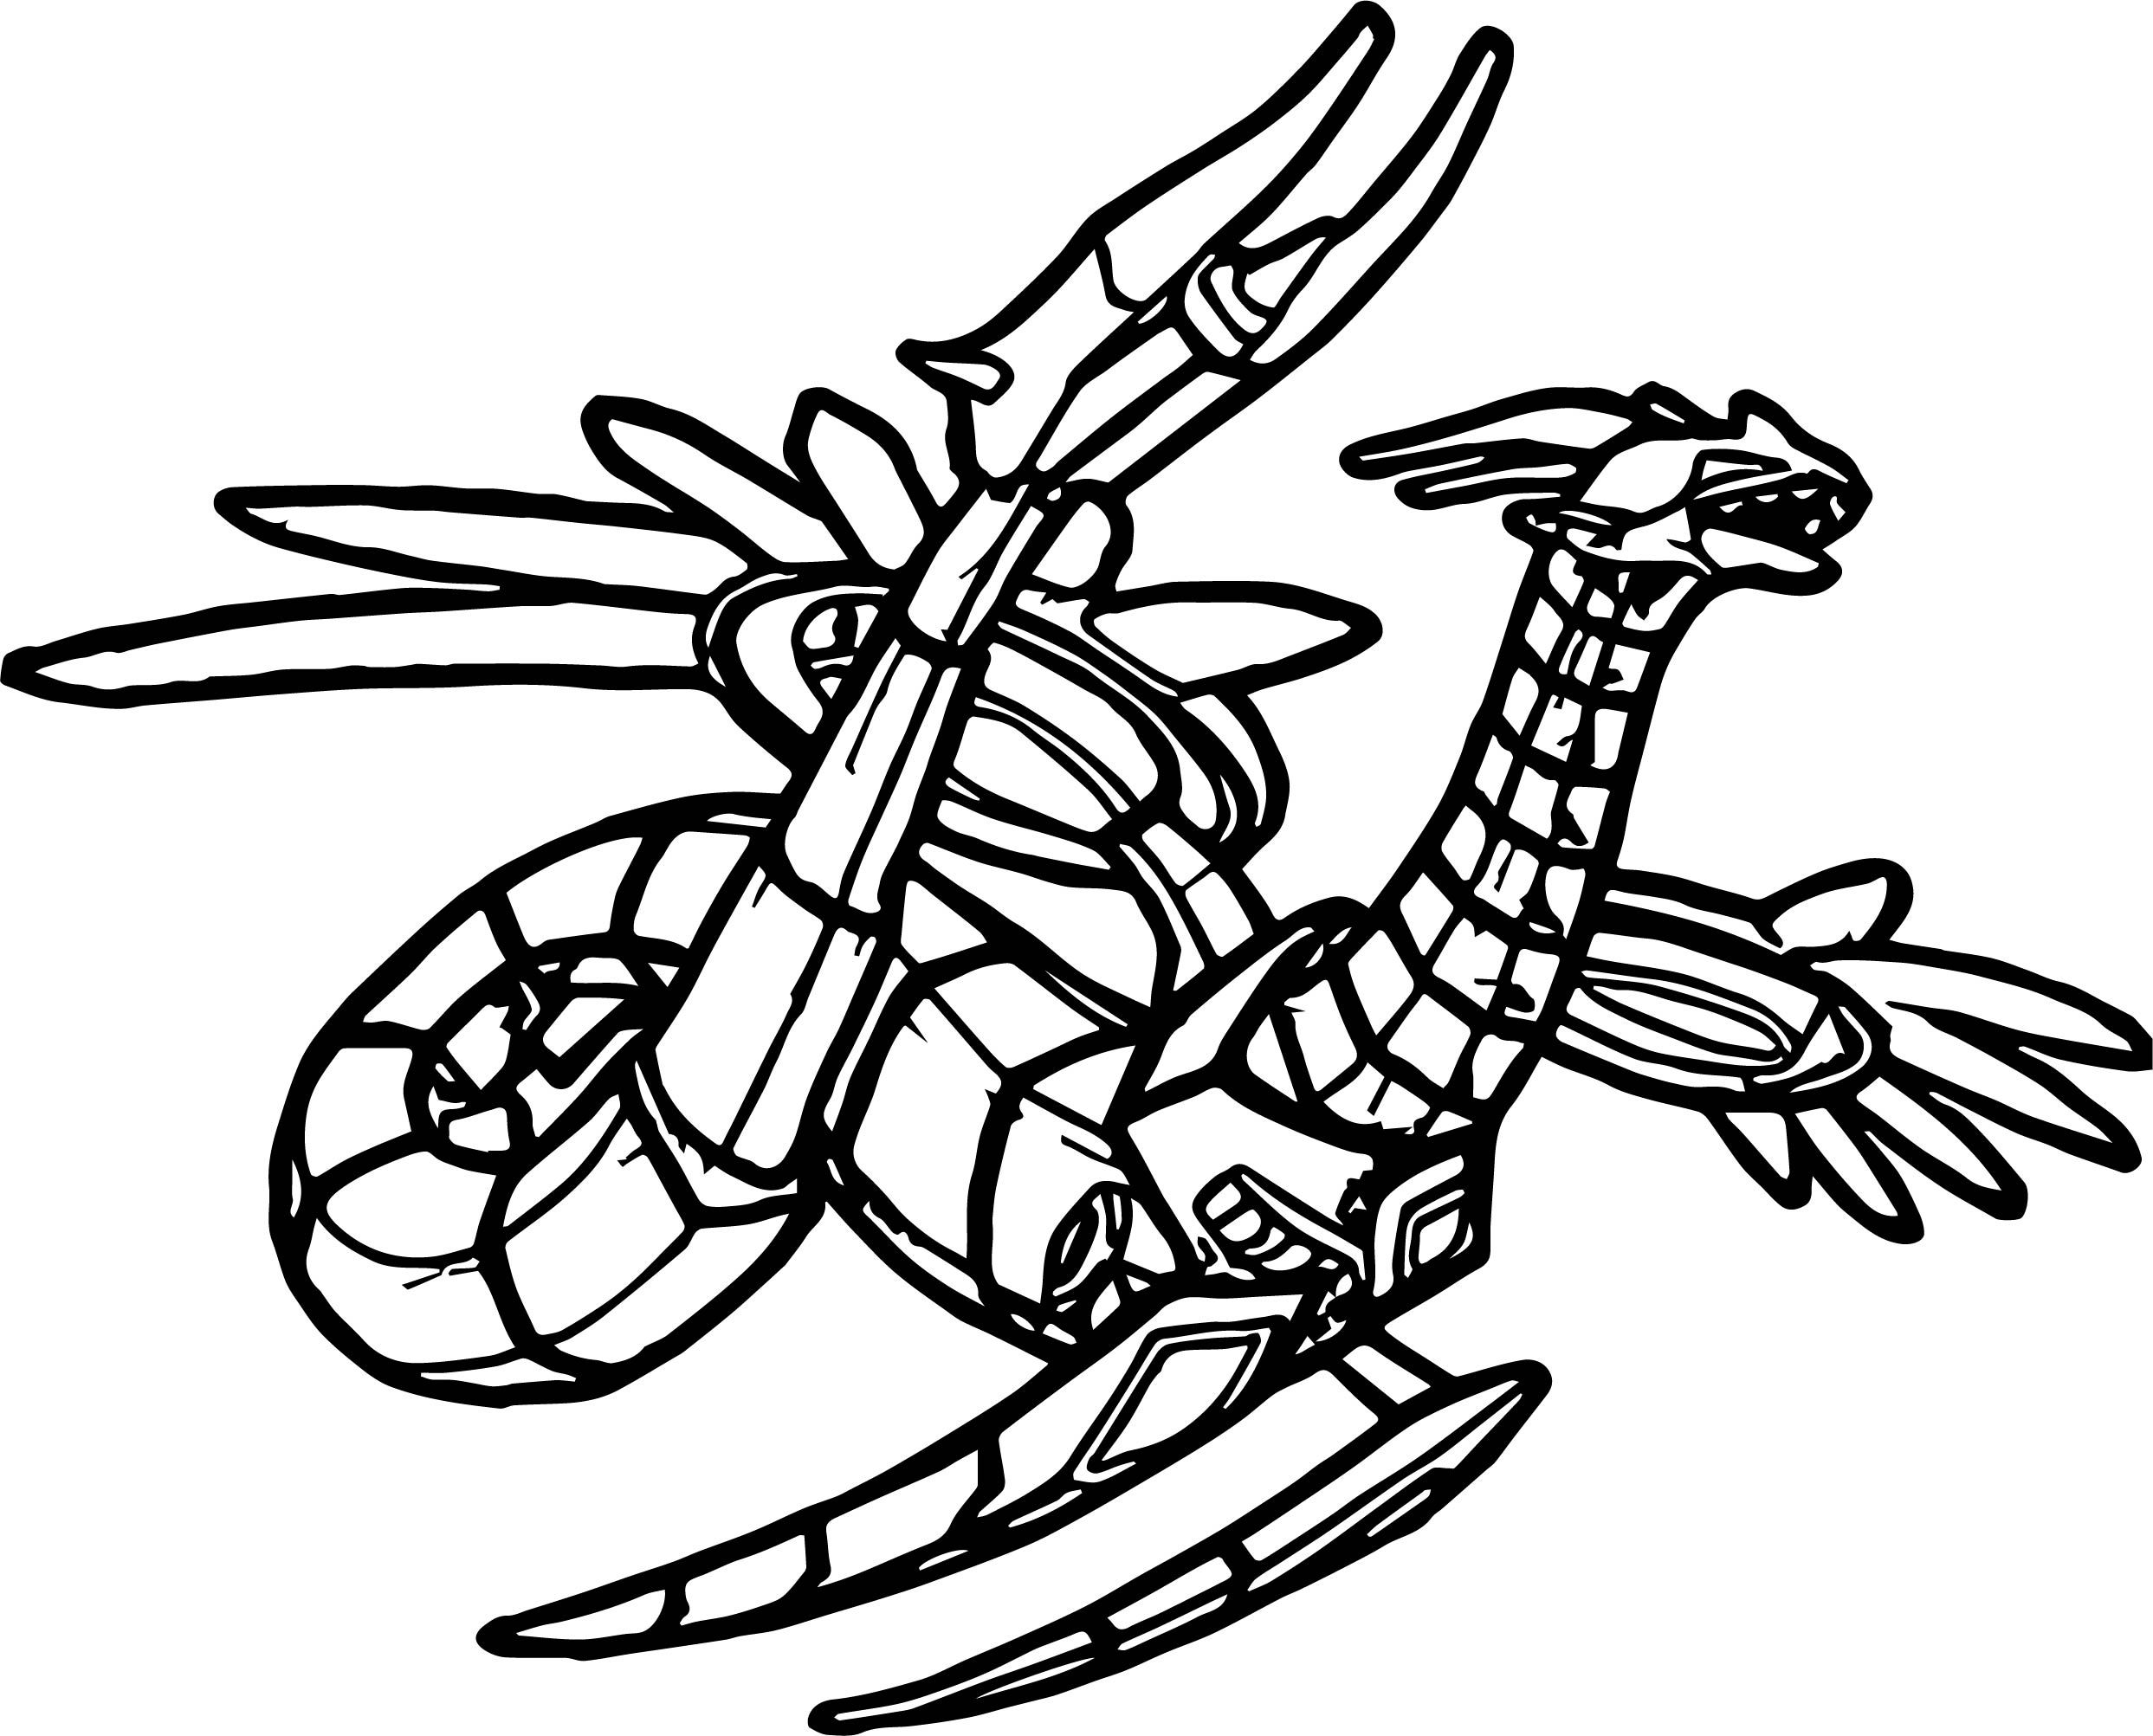 cool Bakugan Altair Coloring Page | Coloring pages, Color, Cool stuff